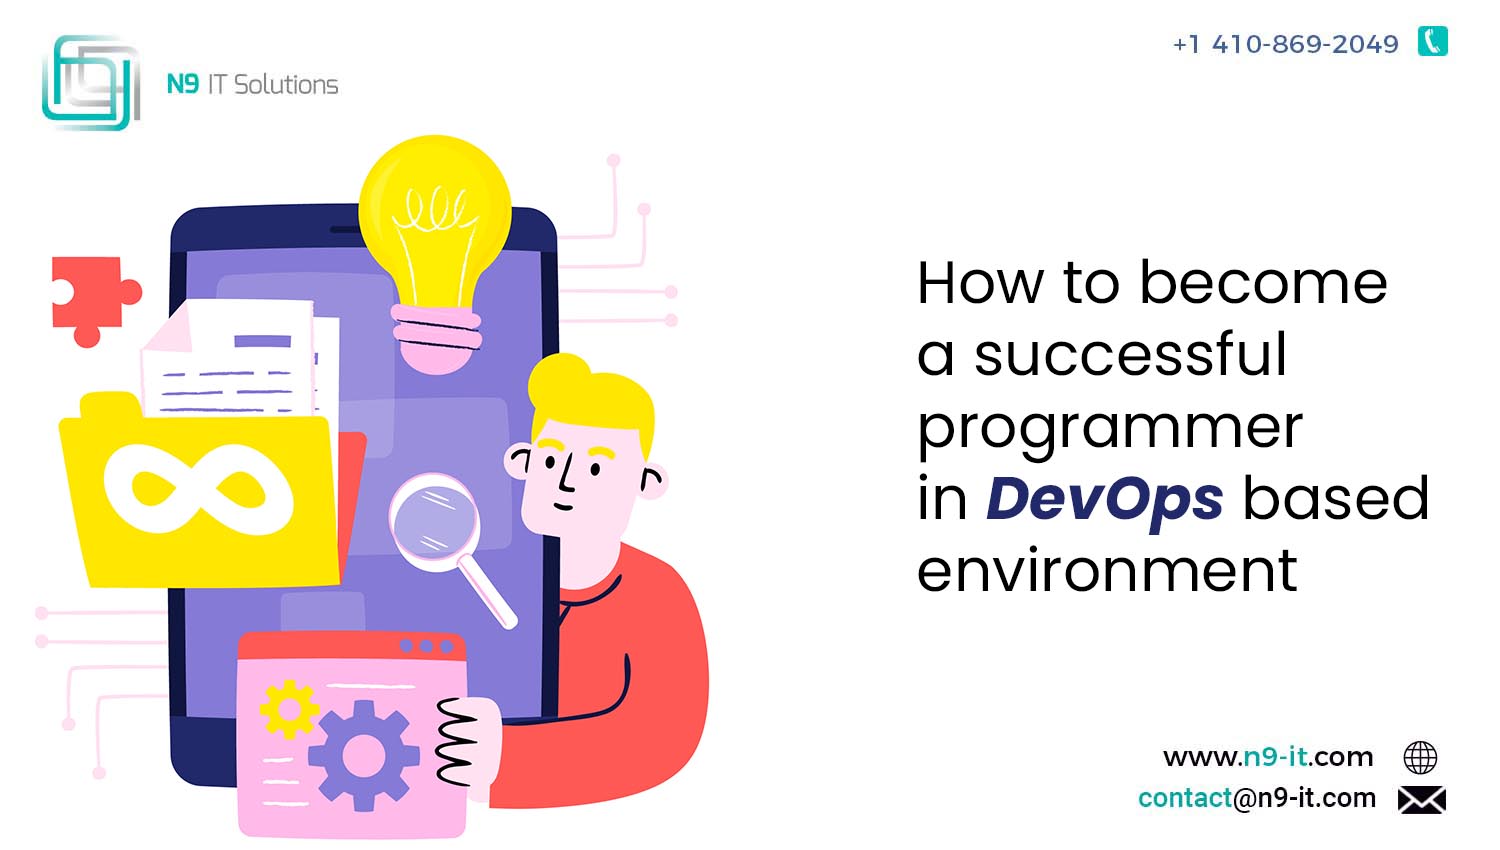 How to become a successful programmer in DevOps based environment